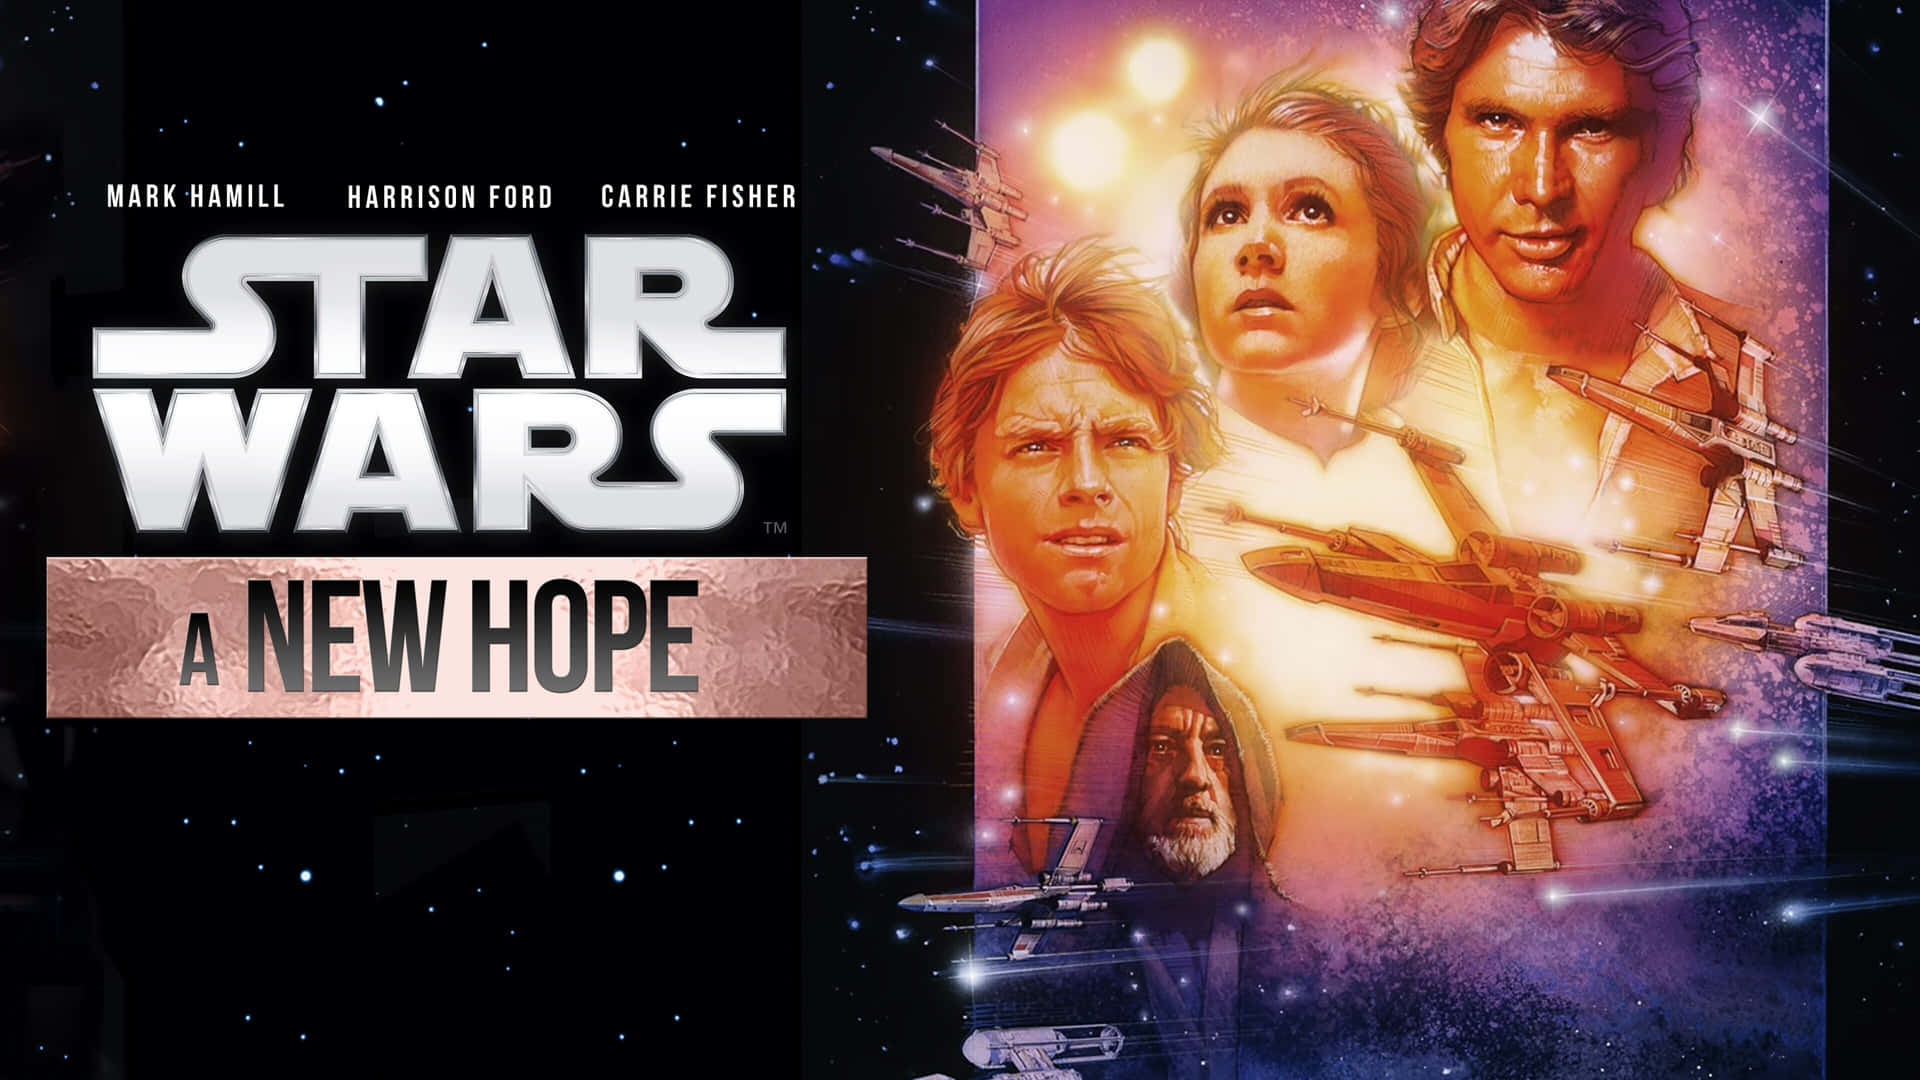 A New Hope - The film that started a Star Wars legacy. Wallpaper